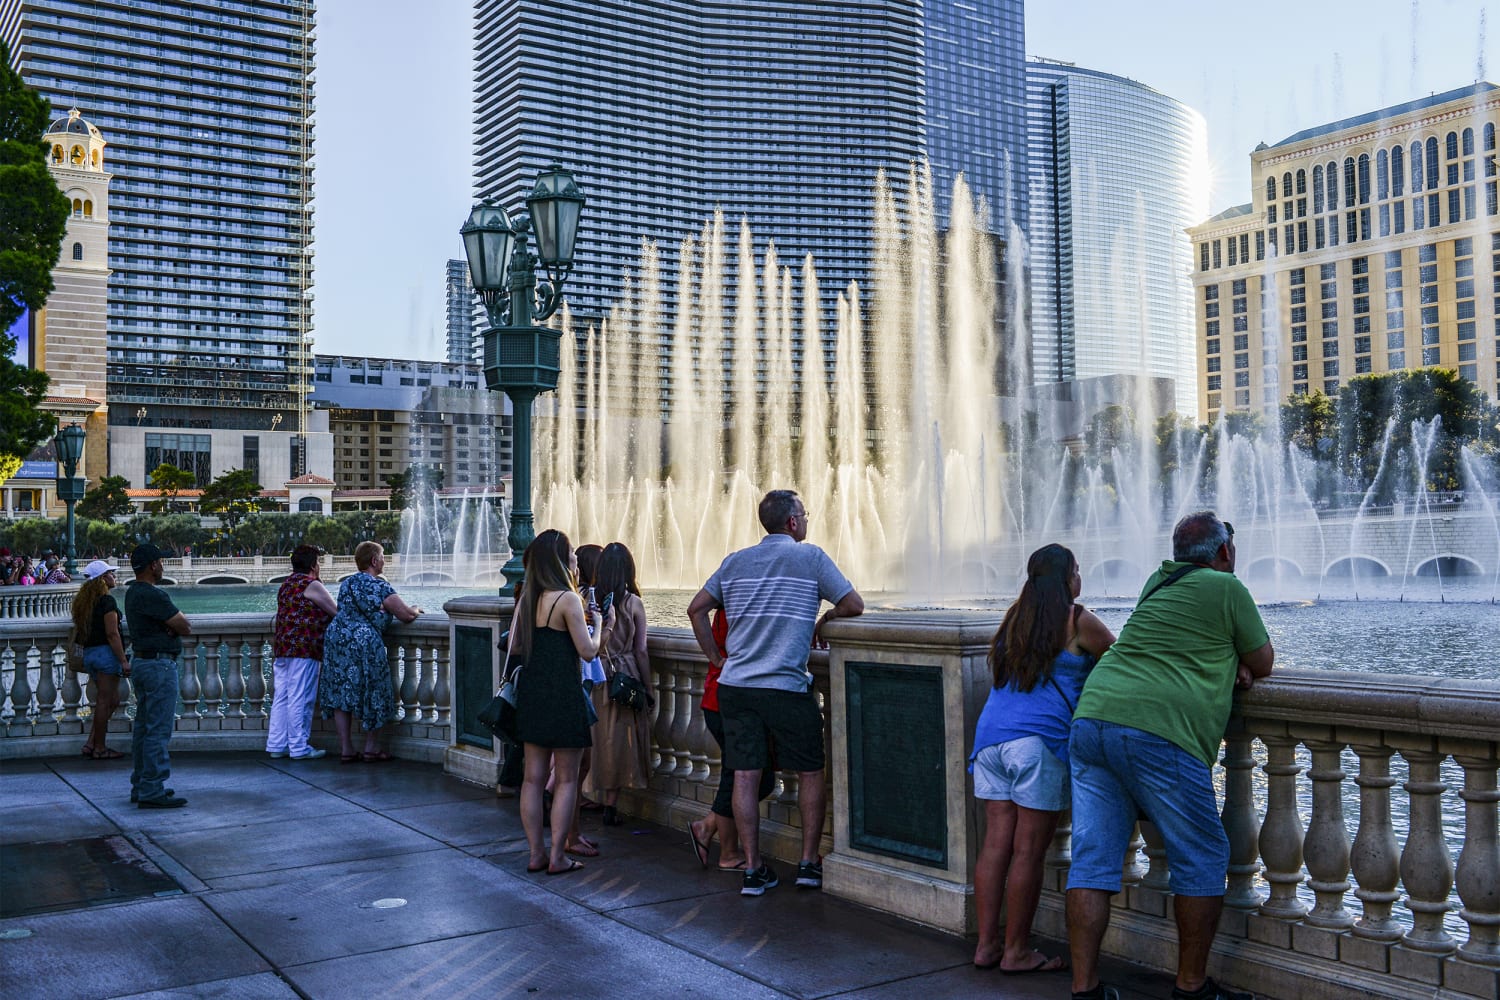 Las Vegas isn't betting on Mother Nature to solve its water